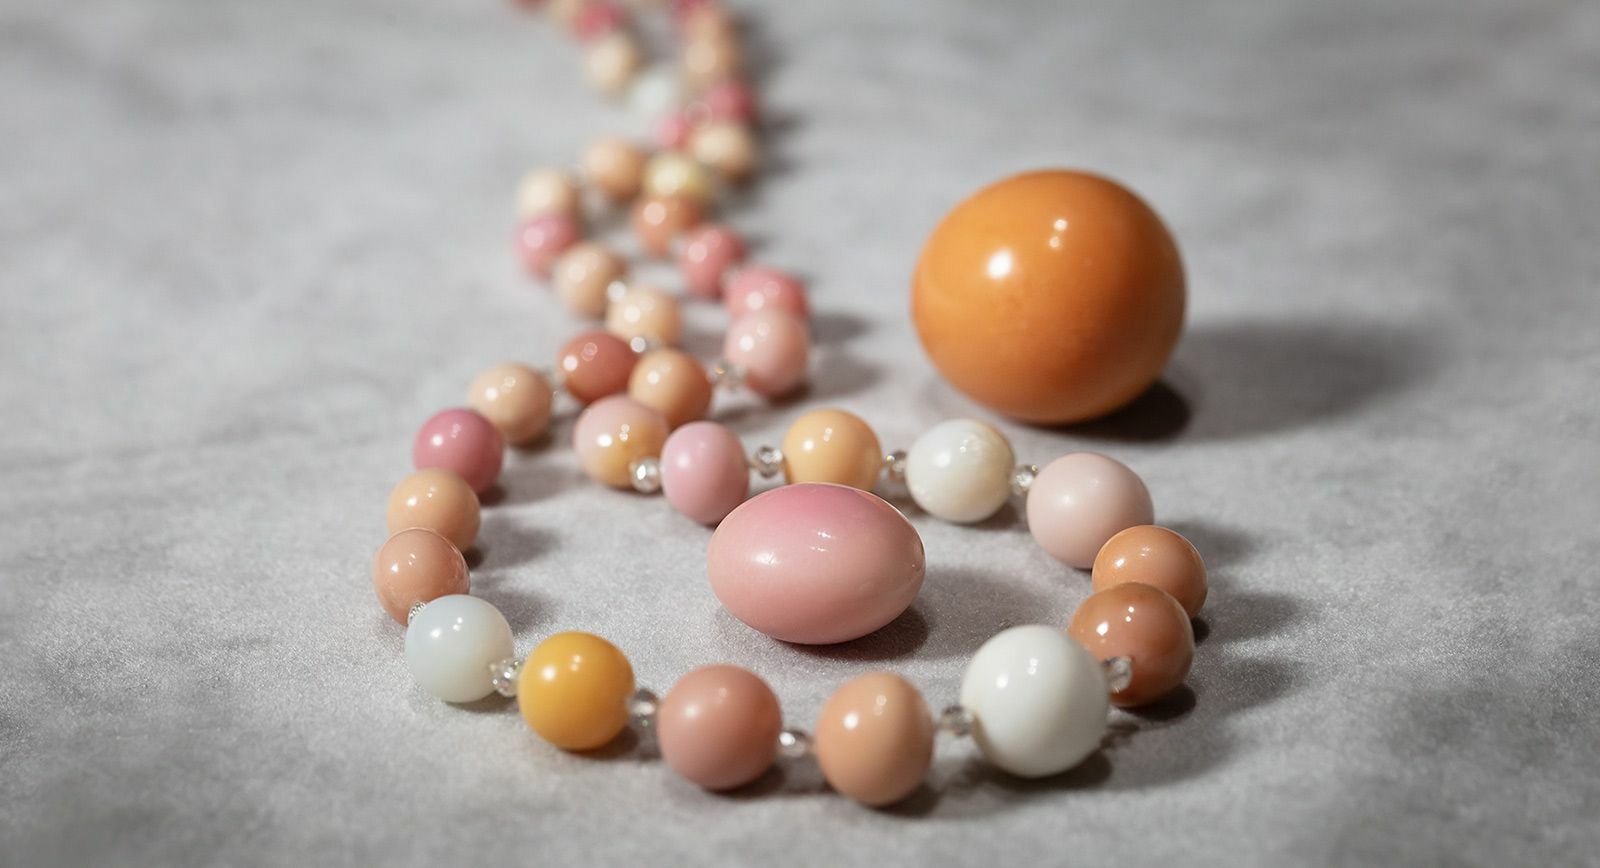 Shanghai Gems necklace with conch pearls